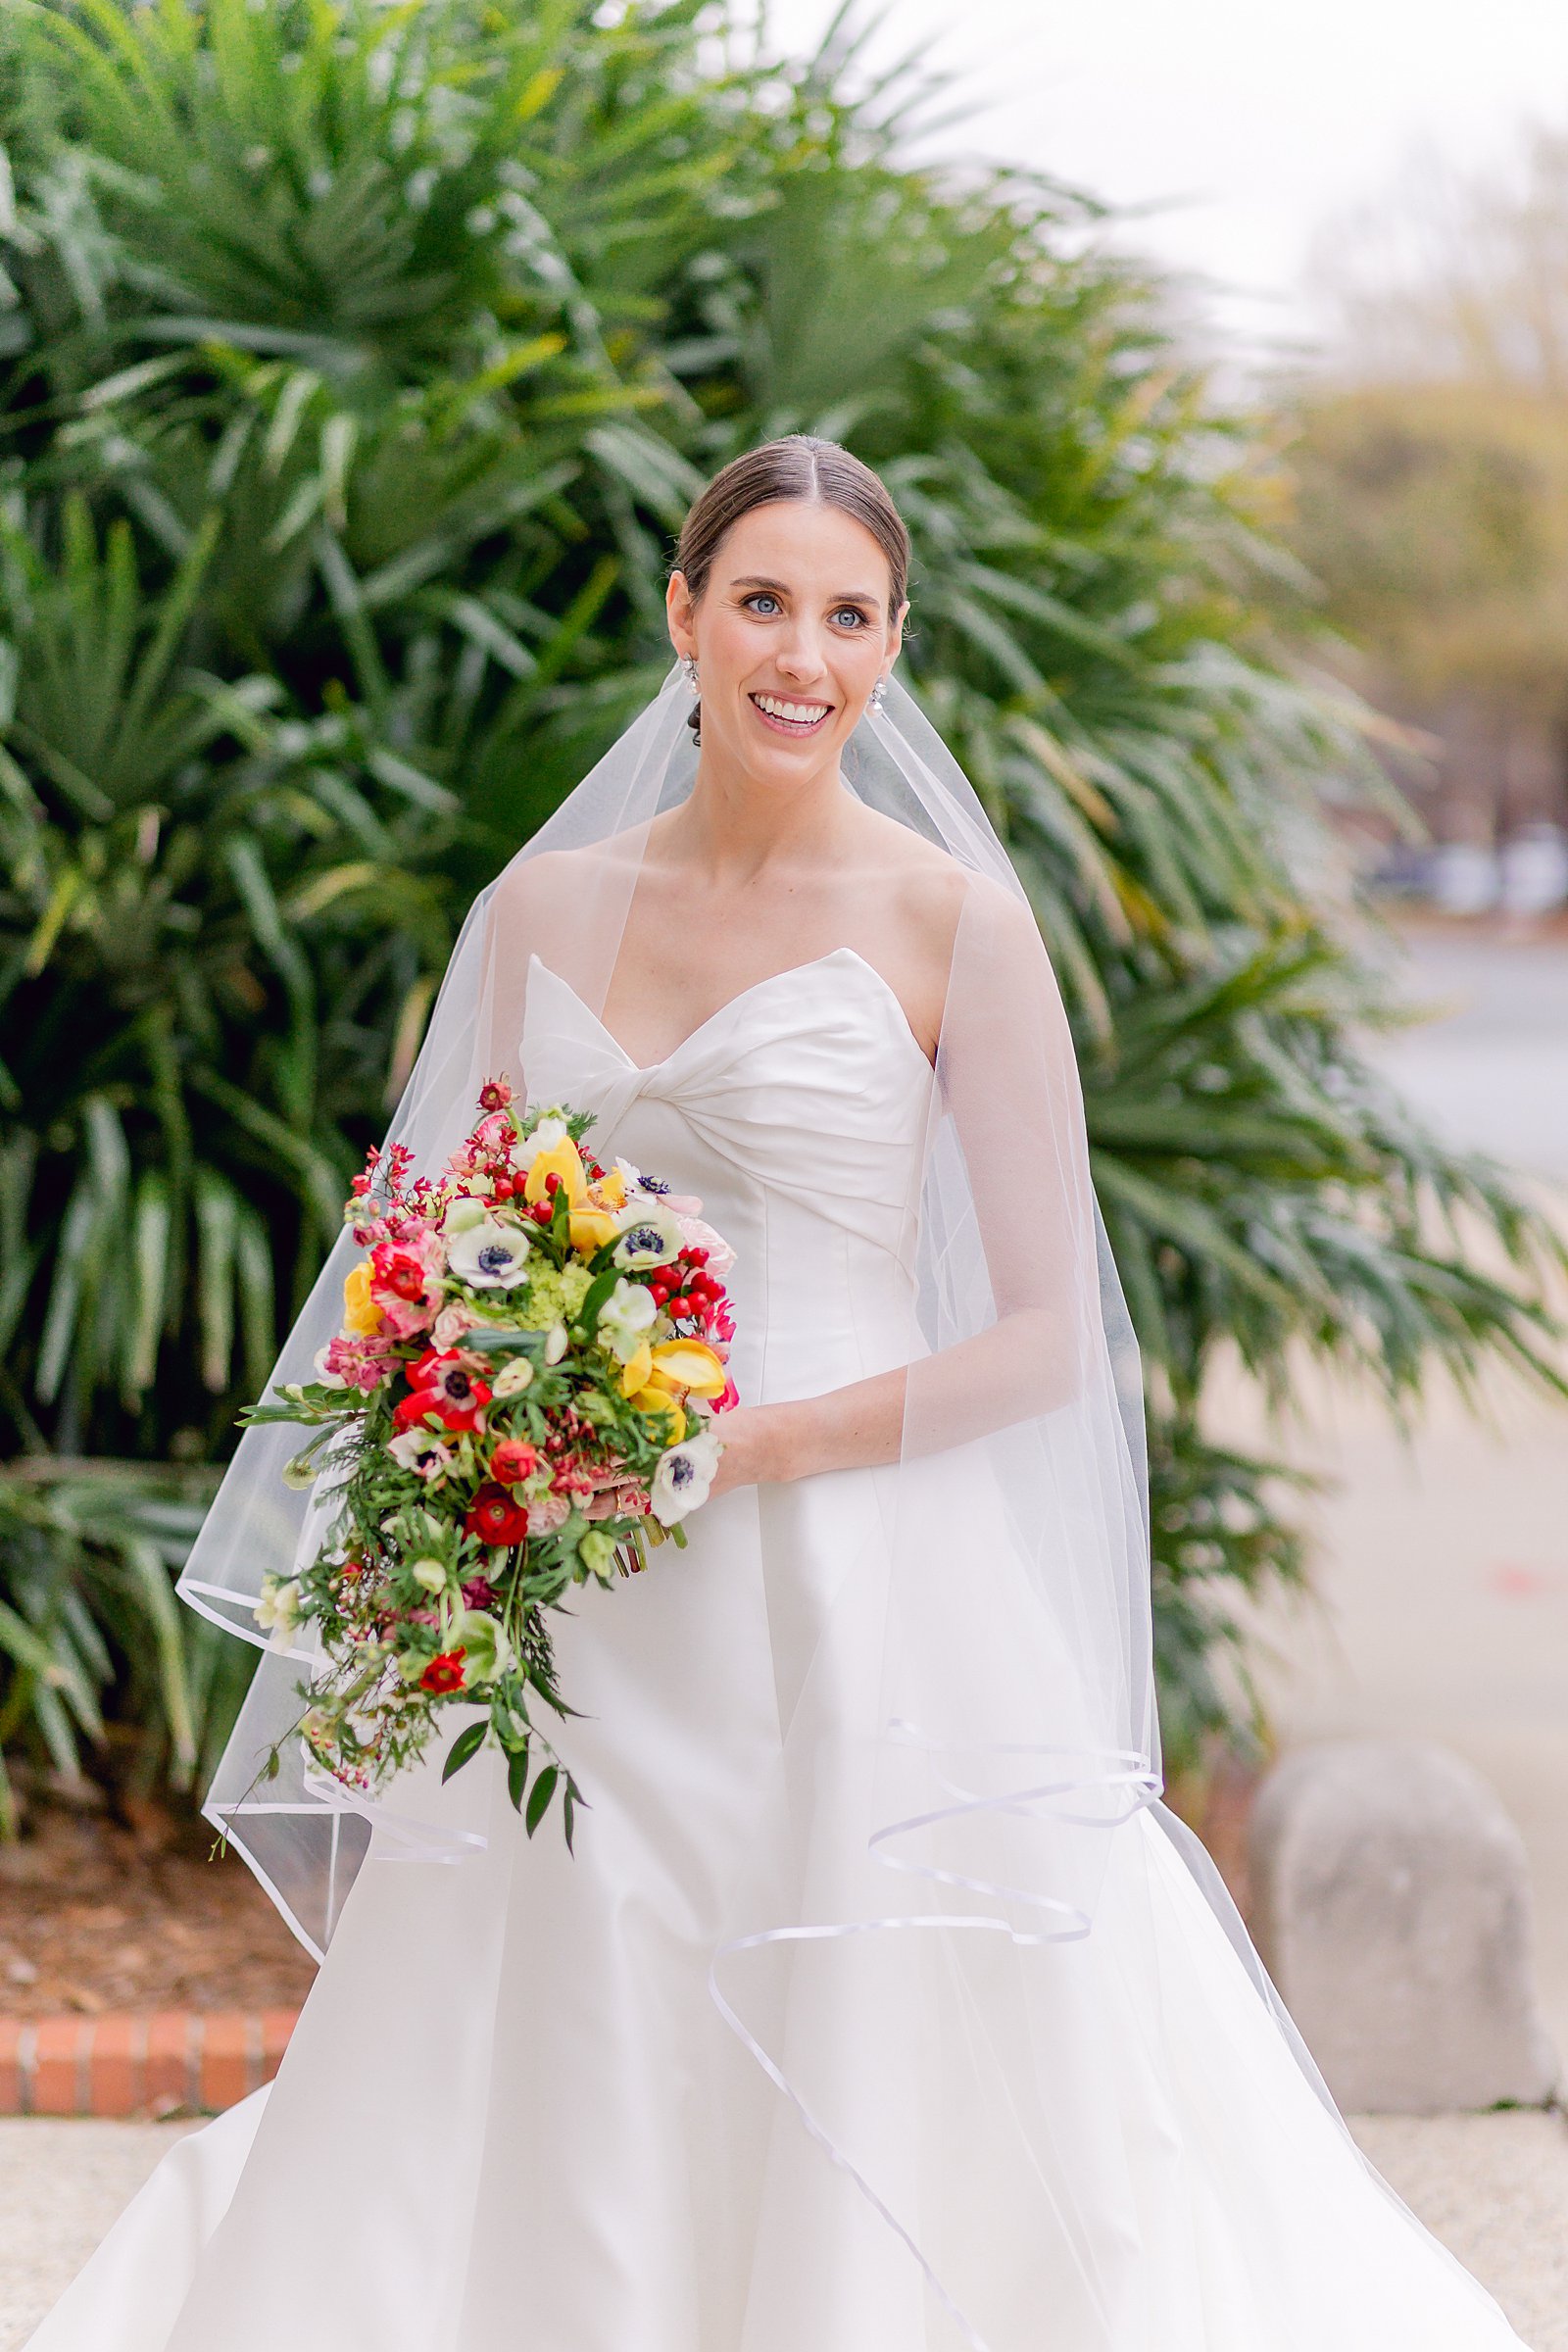 colorful winter wedding in columbus, ga - beautiful bride in anne barge gown with colorful winter bouquet 